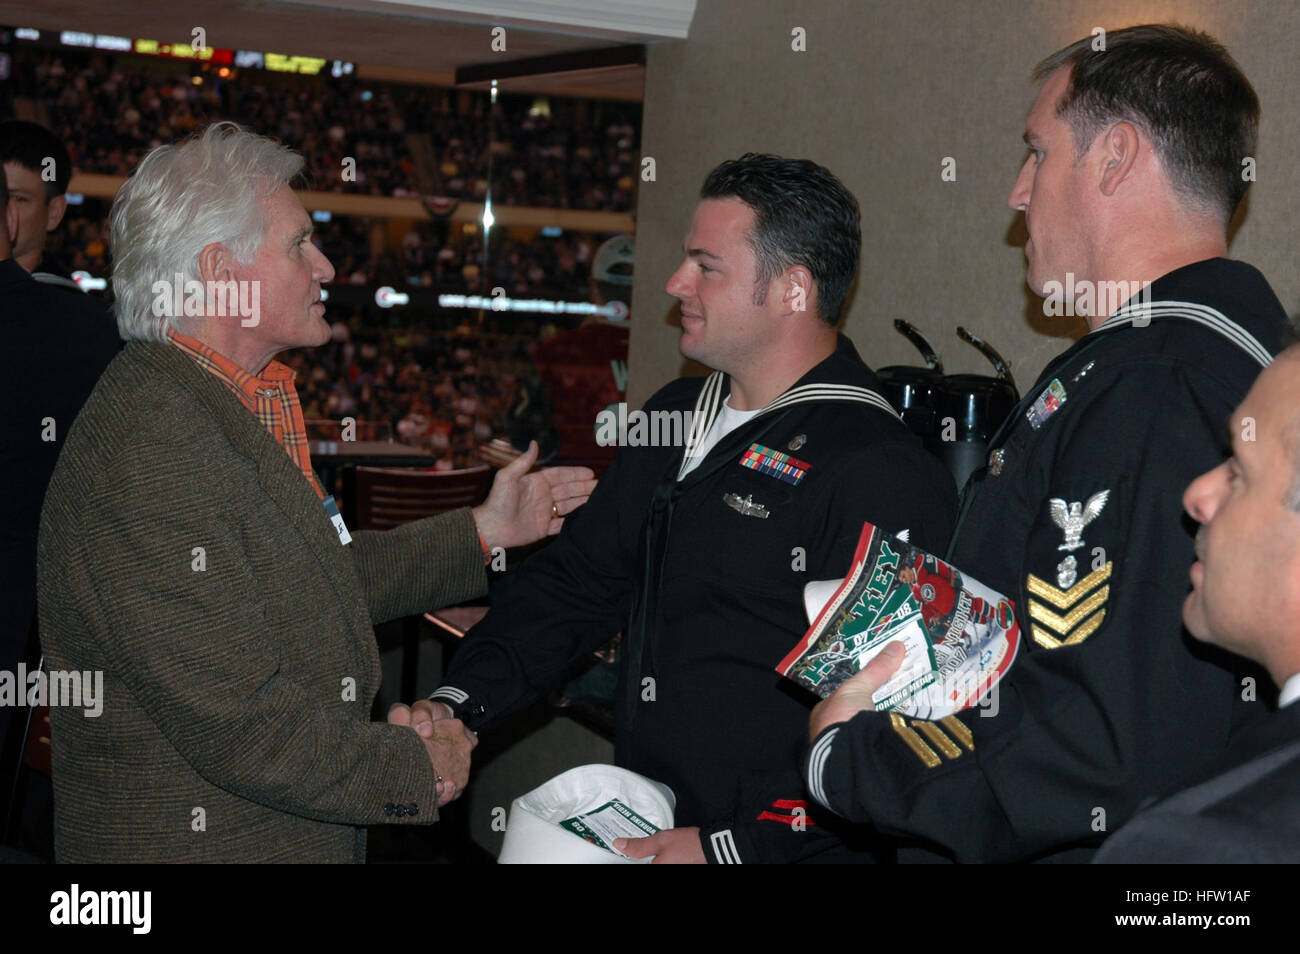 071004-N-7006N-002  ST. PAUL, Minn. (Oct. 4, 2007) - Navy divers assigned to Mobile Diving and Salvage Unit (MDSU) 2, meet Minnesota Wild owner Bob Naegle during the WildÕs season opening NHL hockey game against the Chicago Blackhawks. Six MDSU-2 divers returned to the area to participate in Twin Cities Navy Week after spending much of August assisting local, state and federal authorities find missing victims in the wake of the I-35W bridge collapse in Minneapolis. Navy Weeks are designed to show Americans the investment they have made in their Navy and to increase awareness in cities that do  Stock Photo